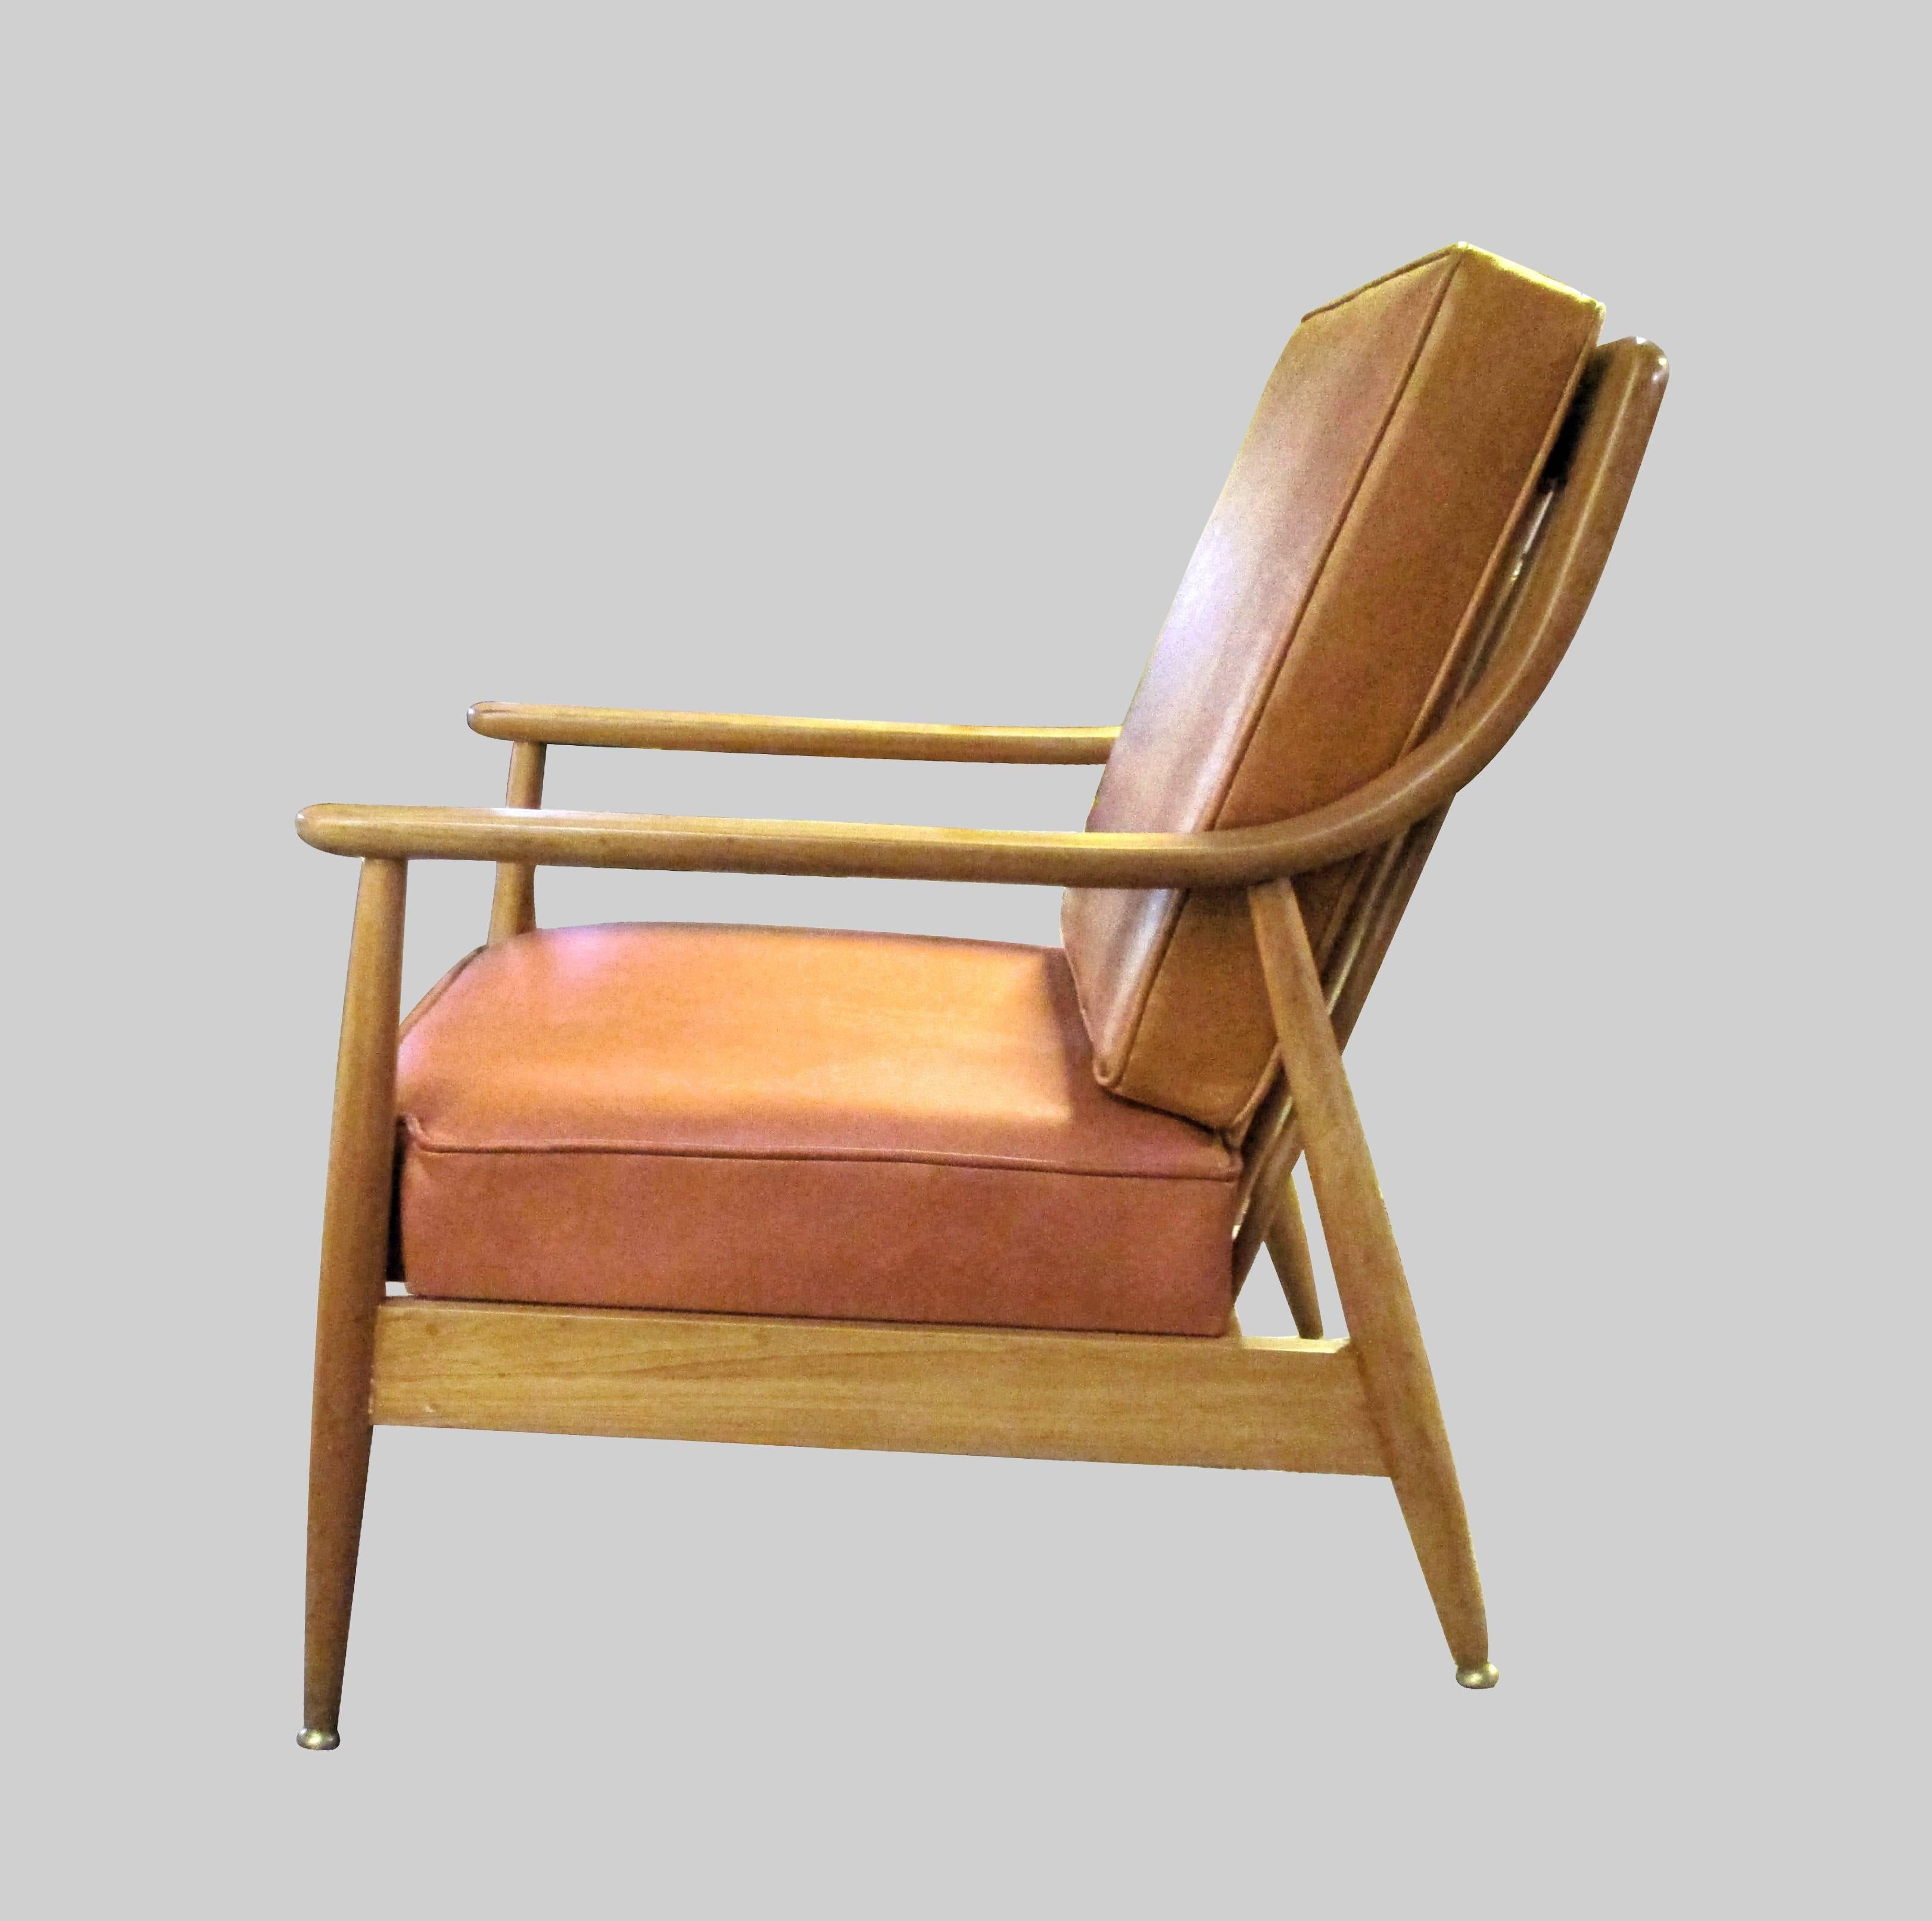 This chair from La Malinche, it has leather seating, ashwood and bronze.

La Malinche or 